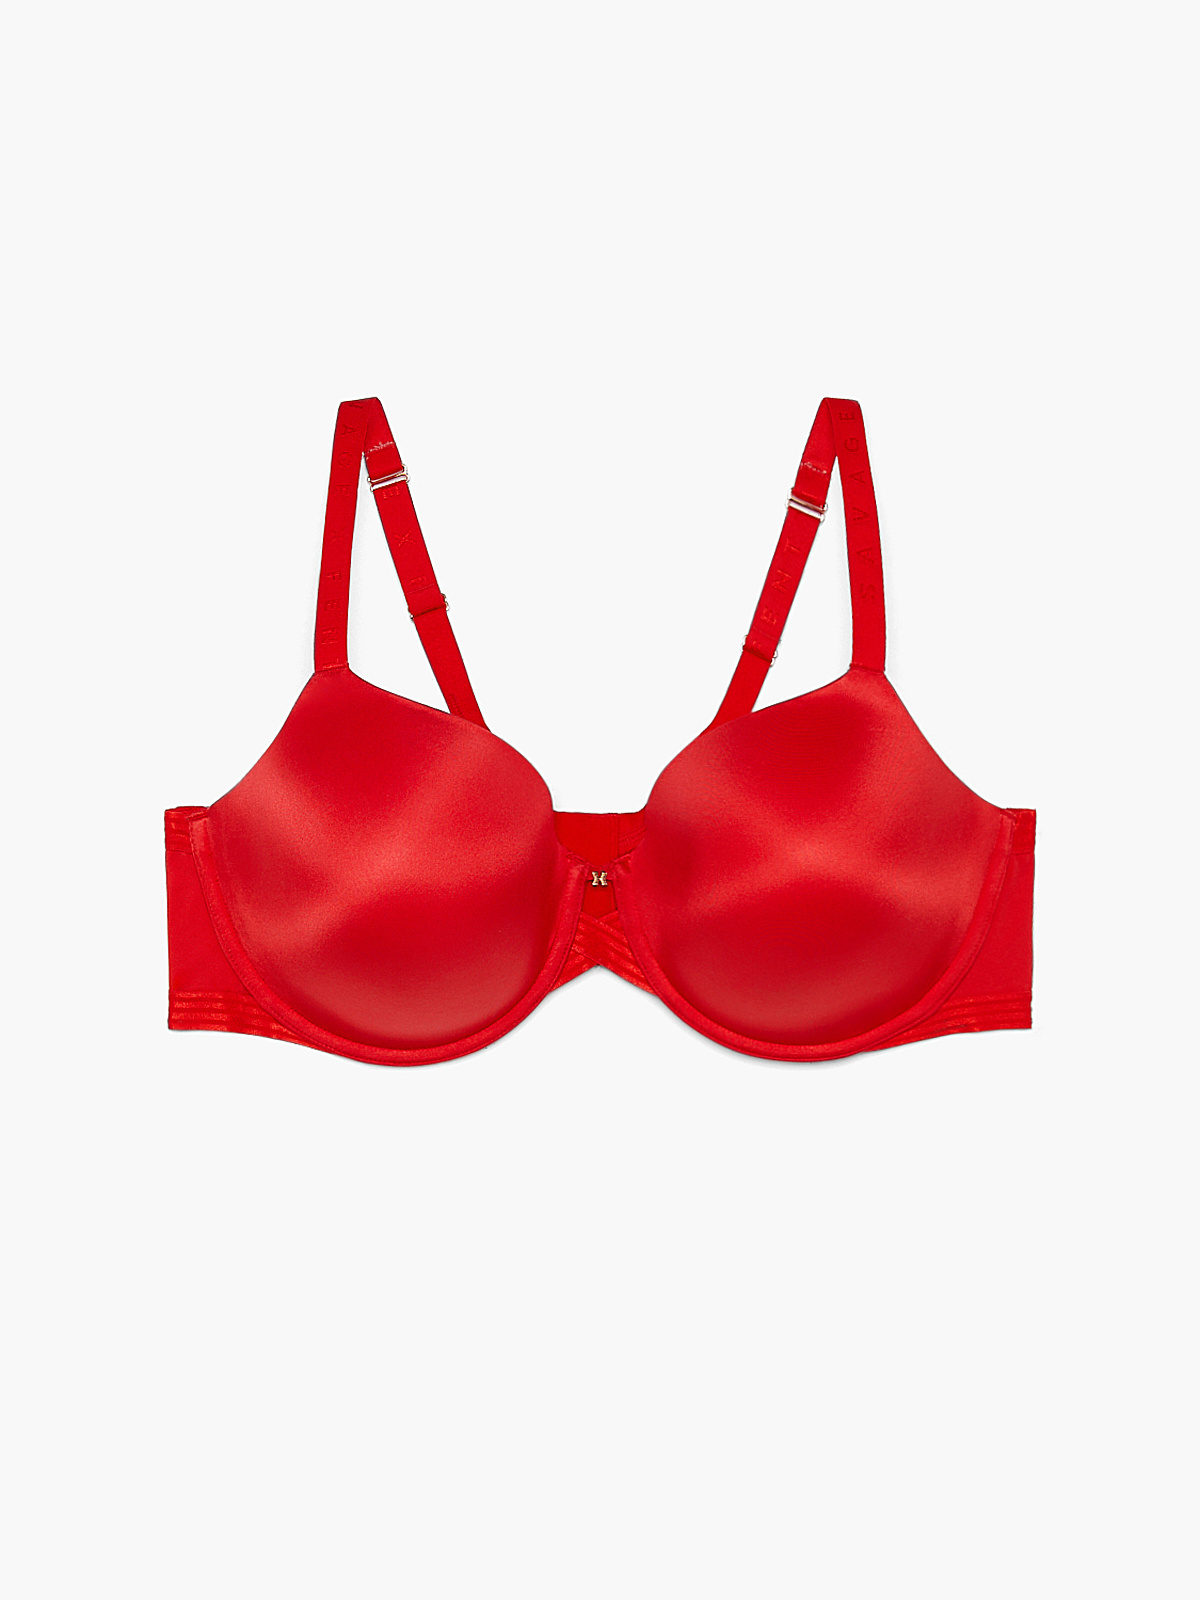 Buy Docare Non Padded Cotton T Shirt Bra - Red Online at Low